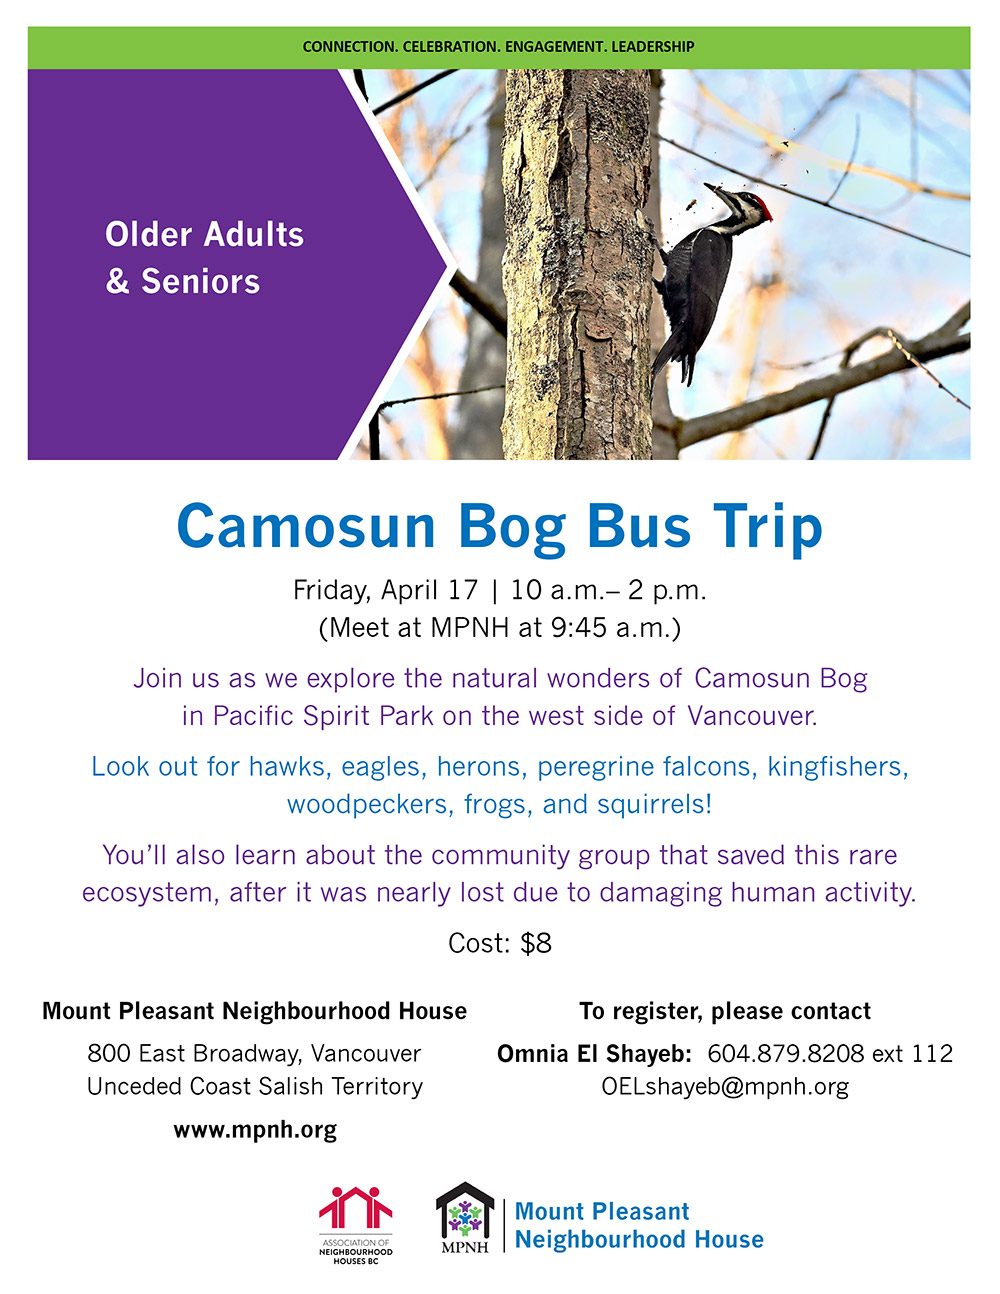 Poster for Camosun Bog bus trip showing a woodpecker in the forest